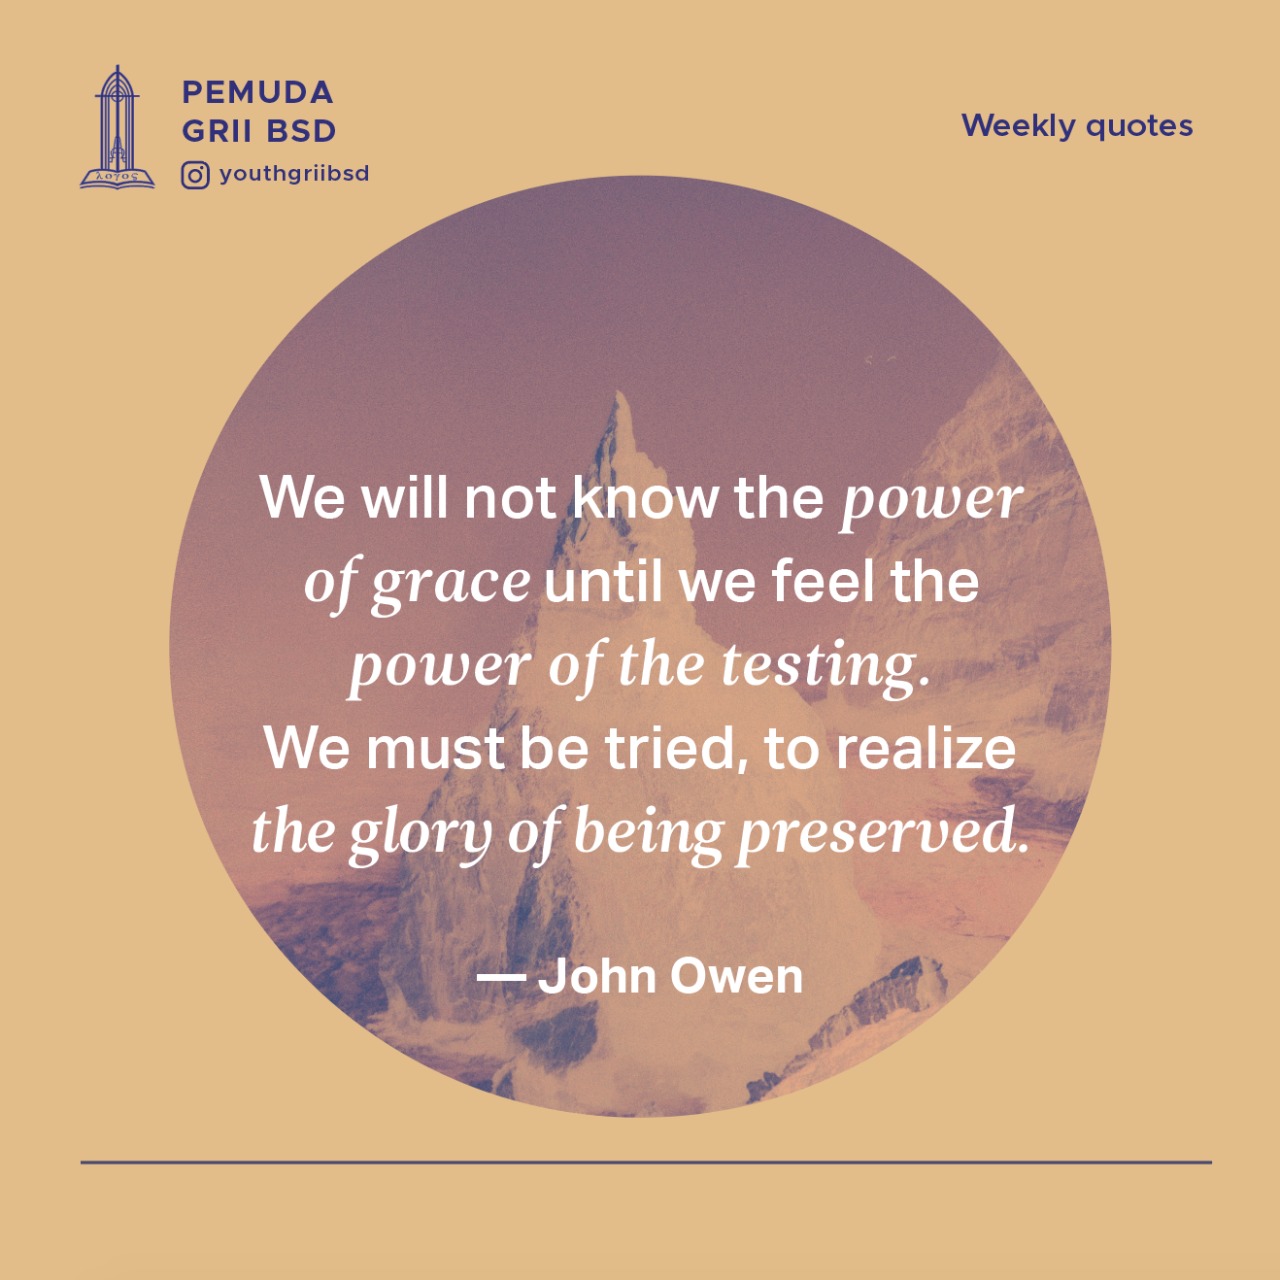 We will not know the power of grace until we feel the power of the testing. We must be tried, to realize the glory of being preserved.